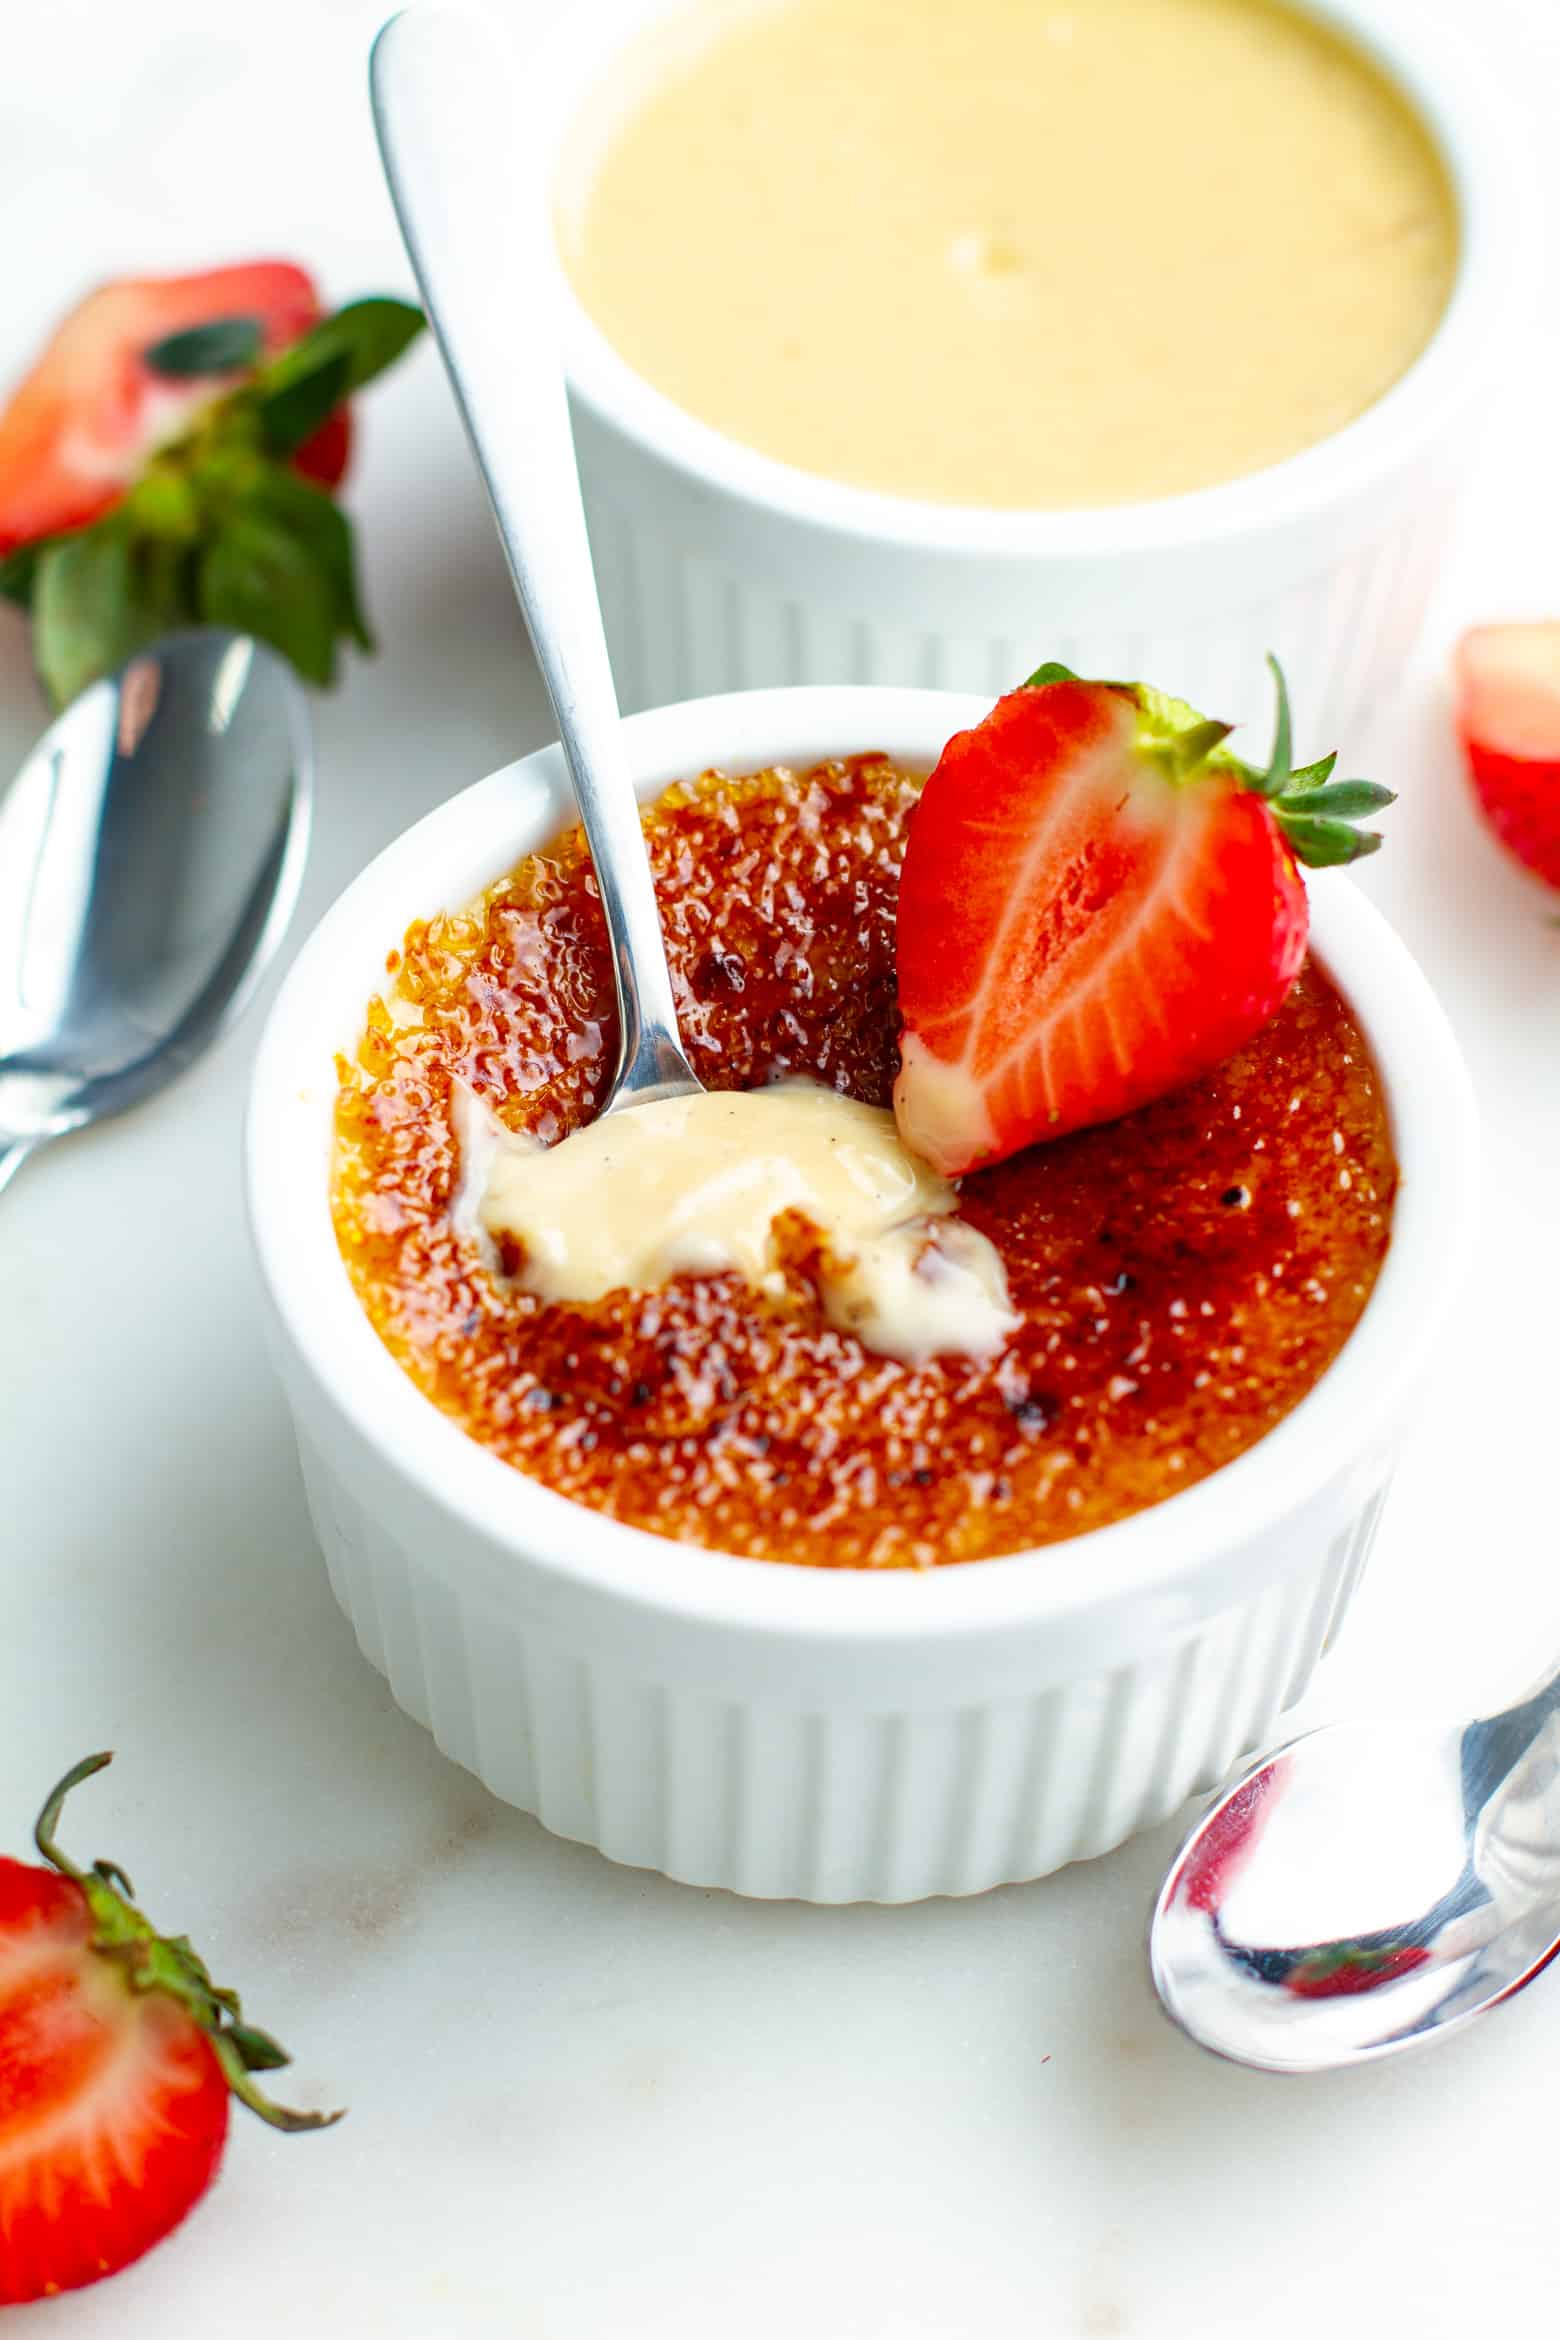 Strawberry Creme Brulee with a spoon inserted.